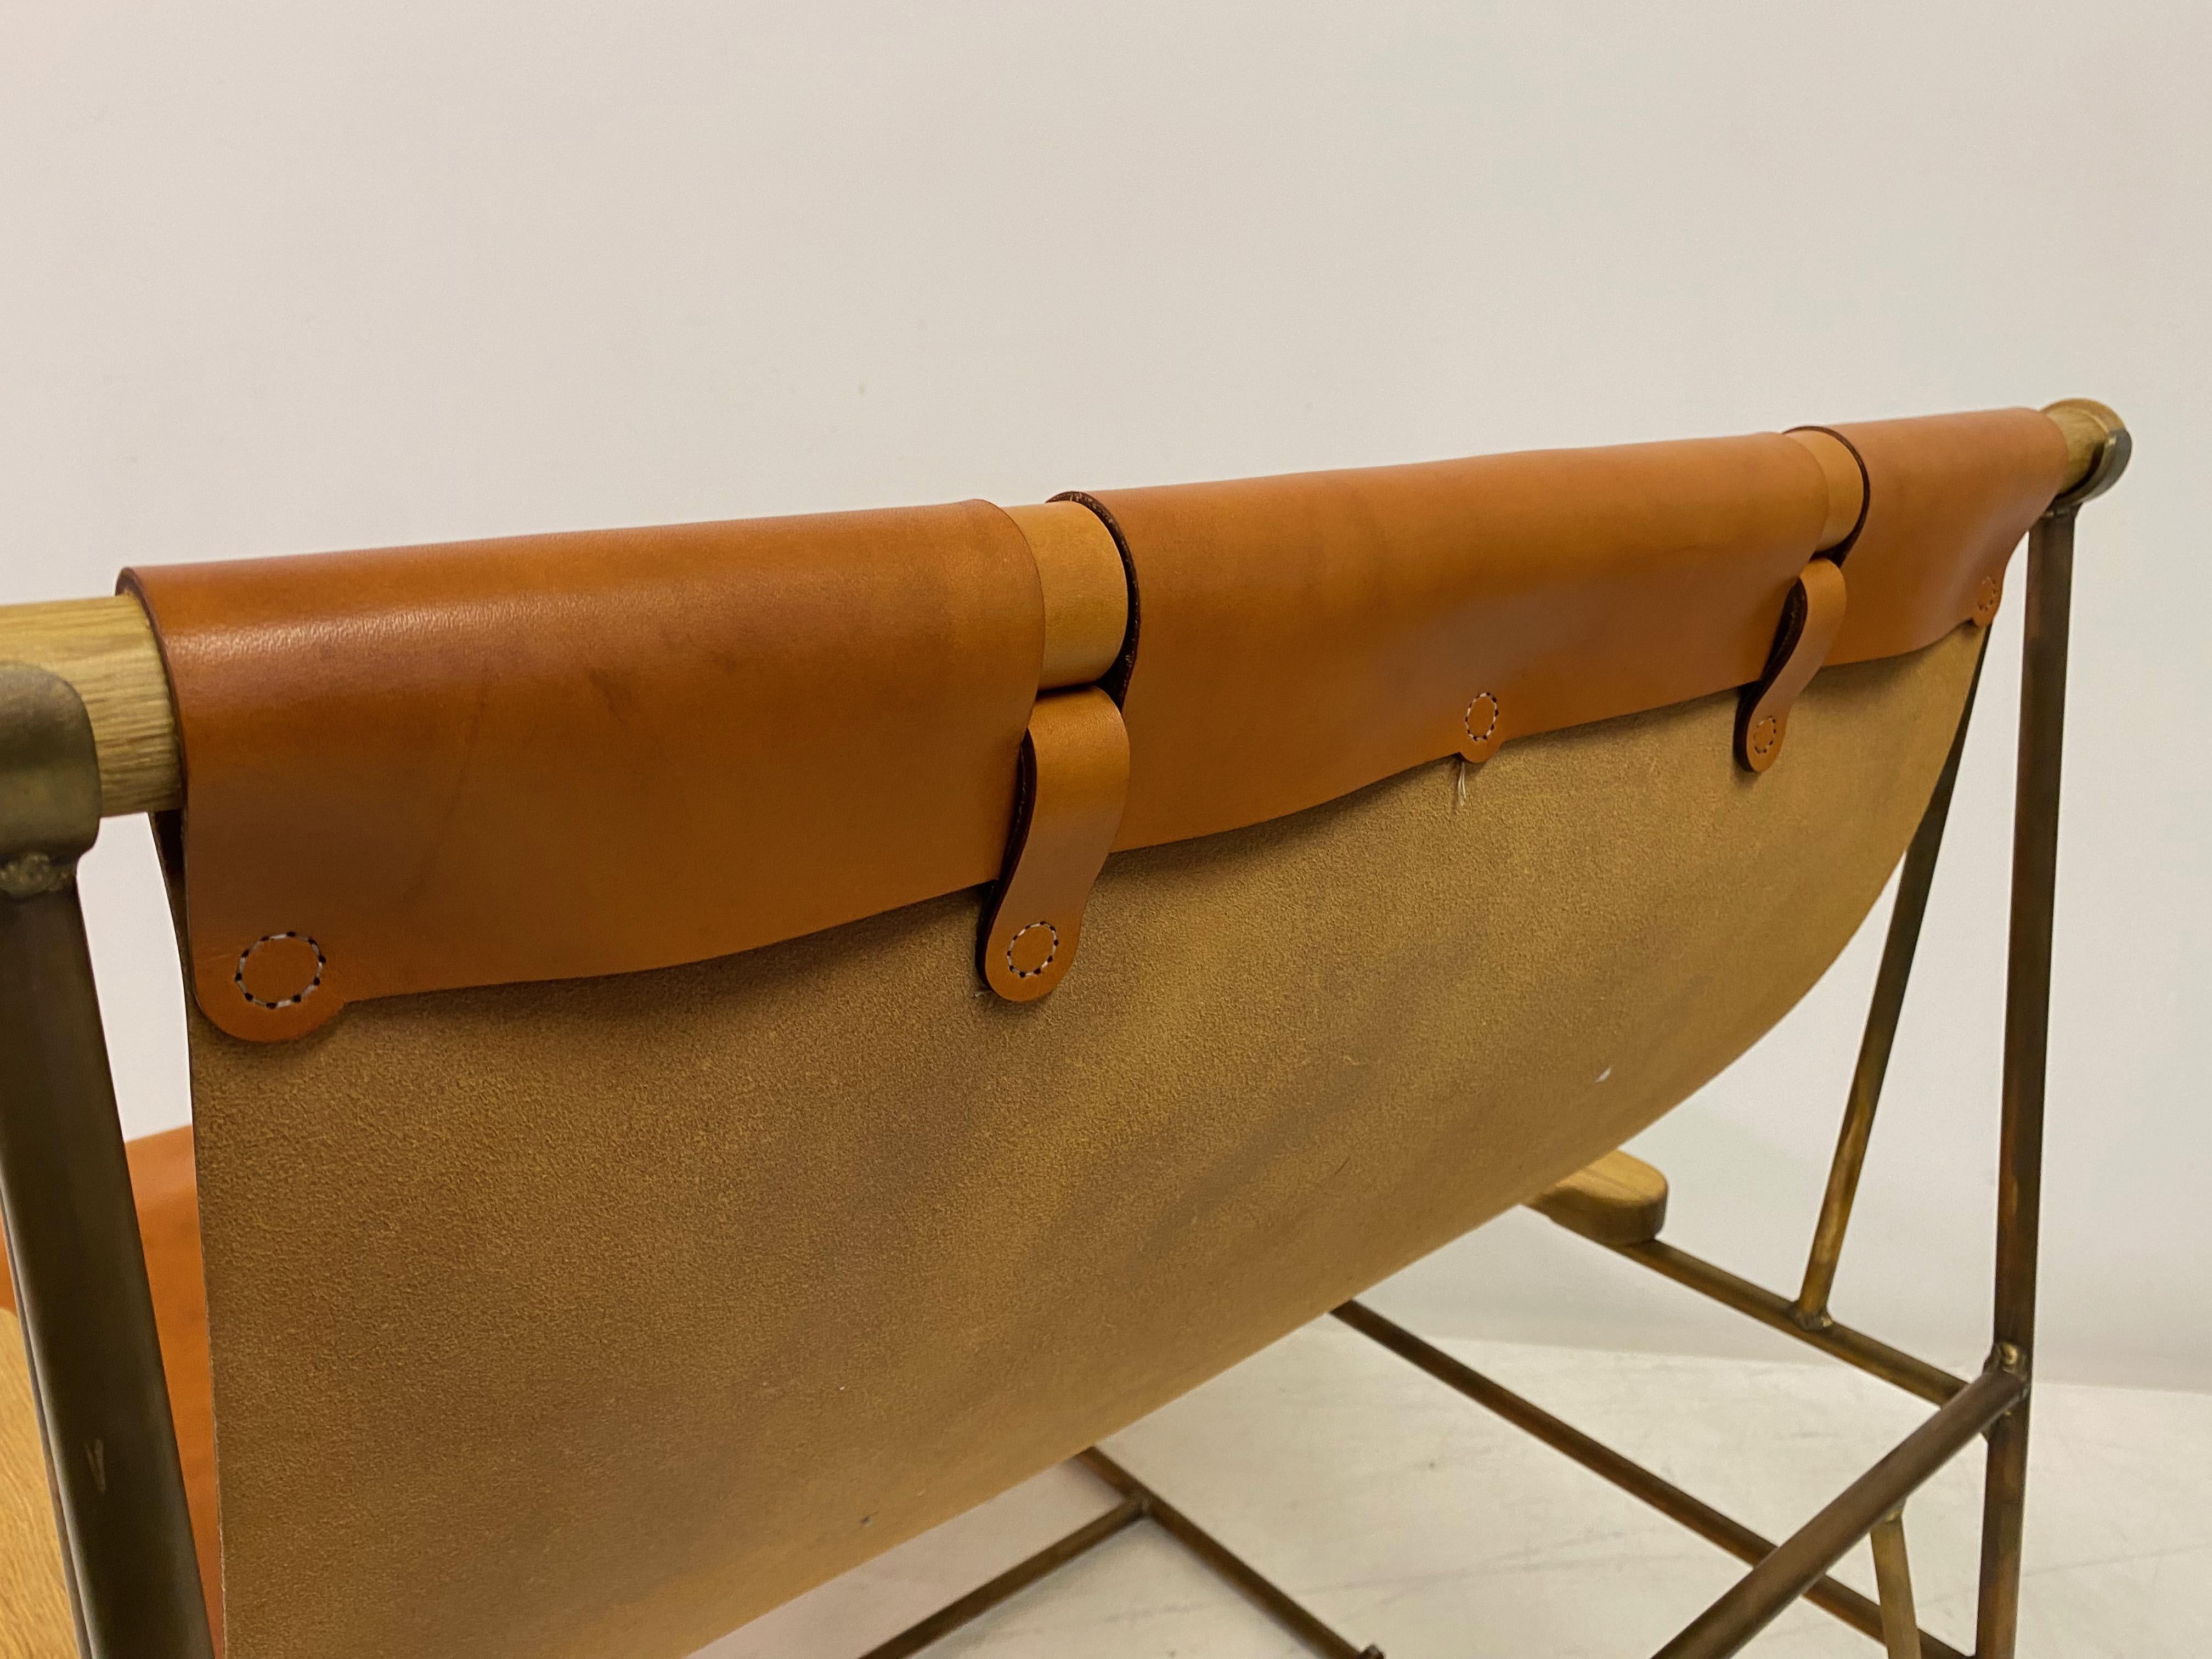 Leather Deck Lounge Chair by Tyler Hays for BDDW 6